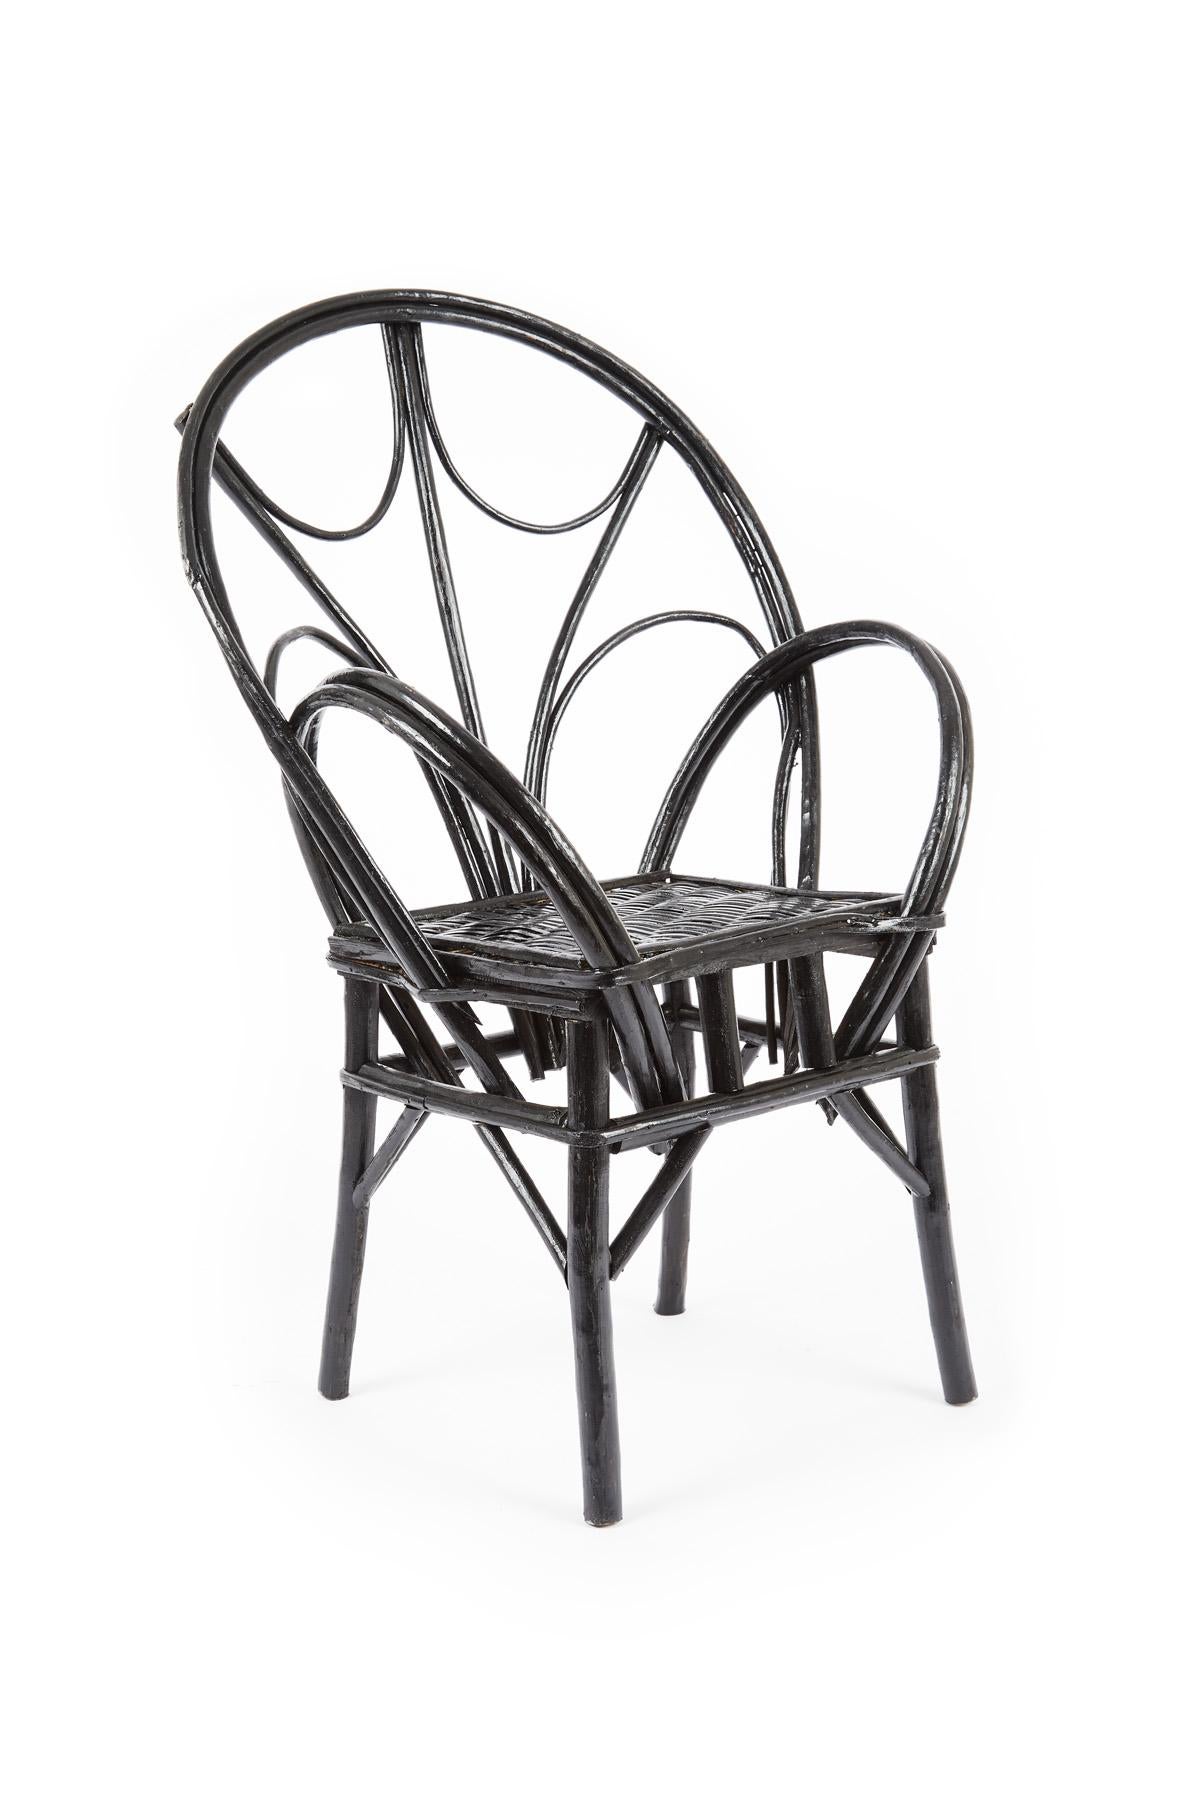 Set of wicker chairs handmade in Morocco with natural wicker and painted in black. 
